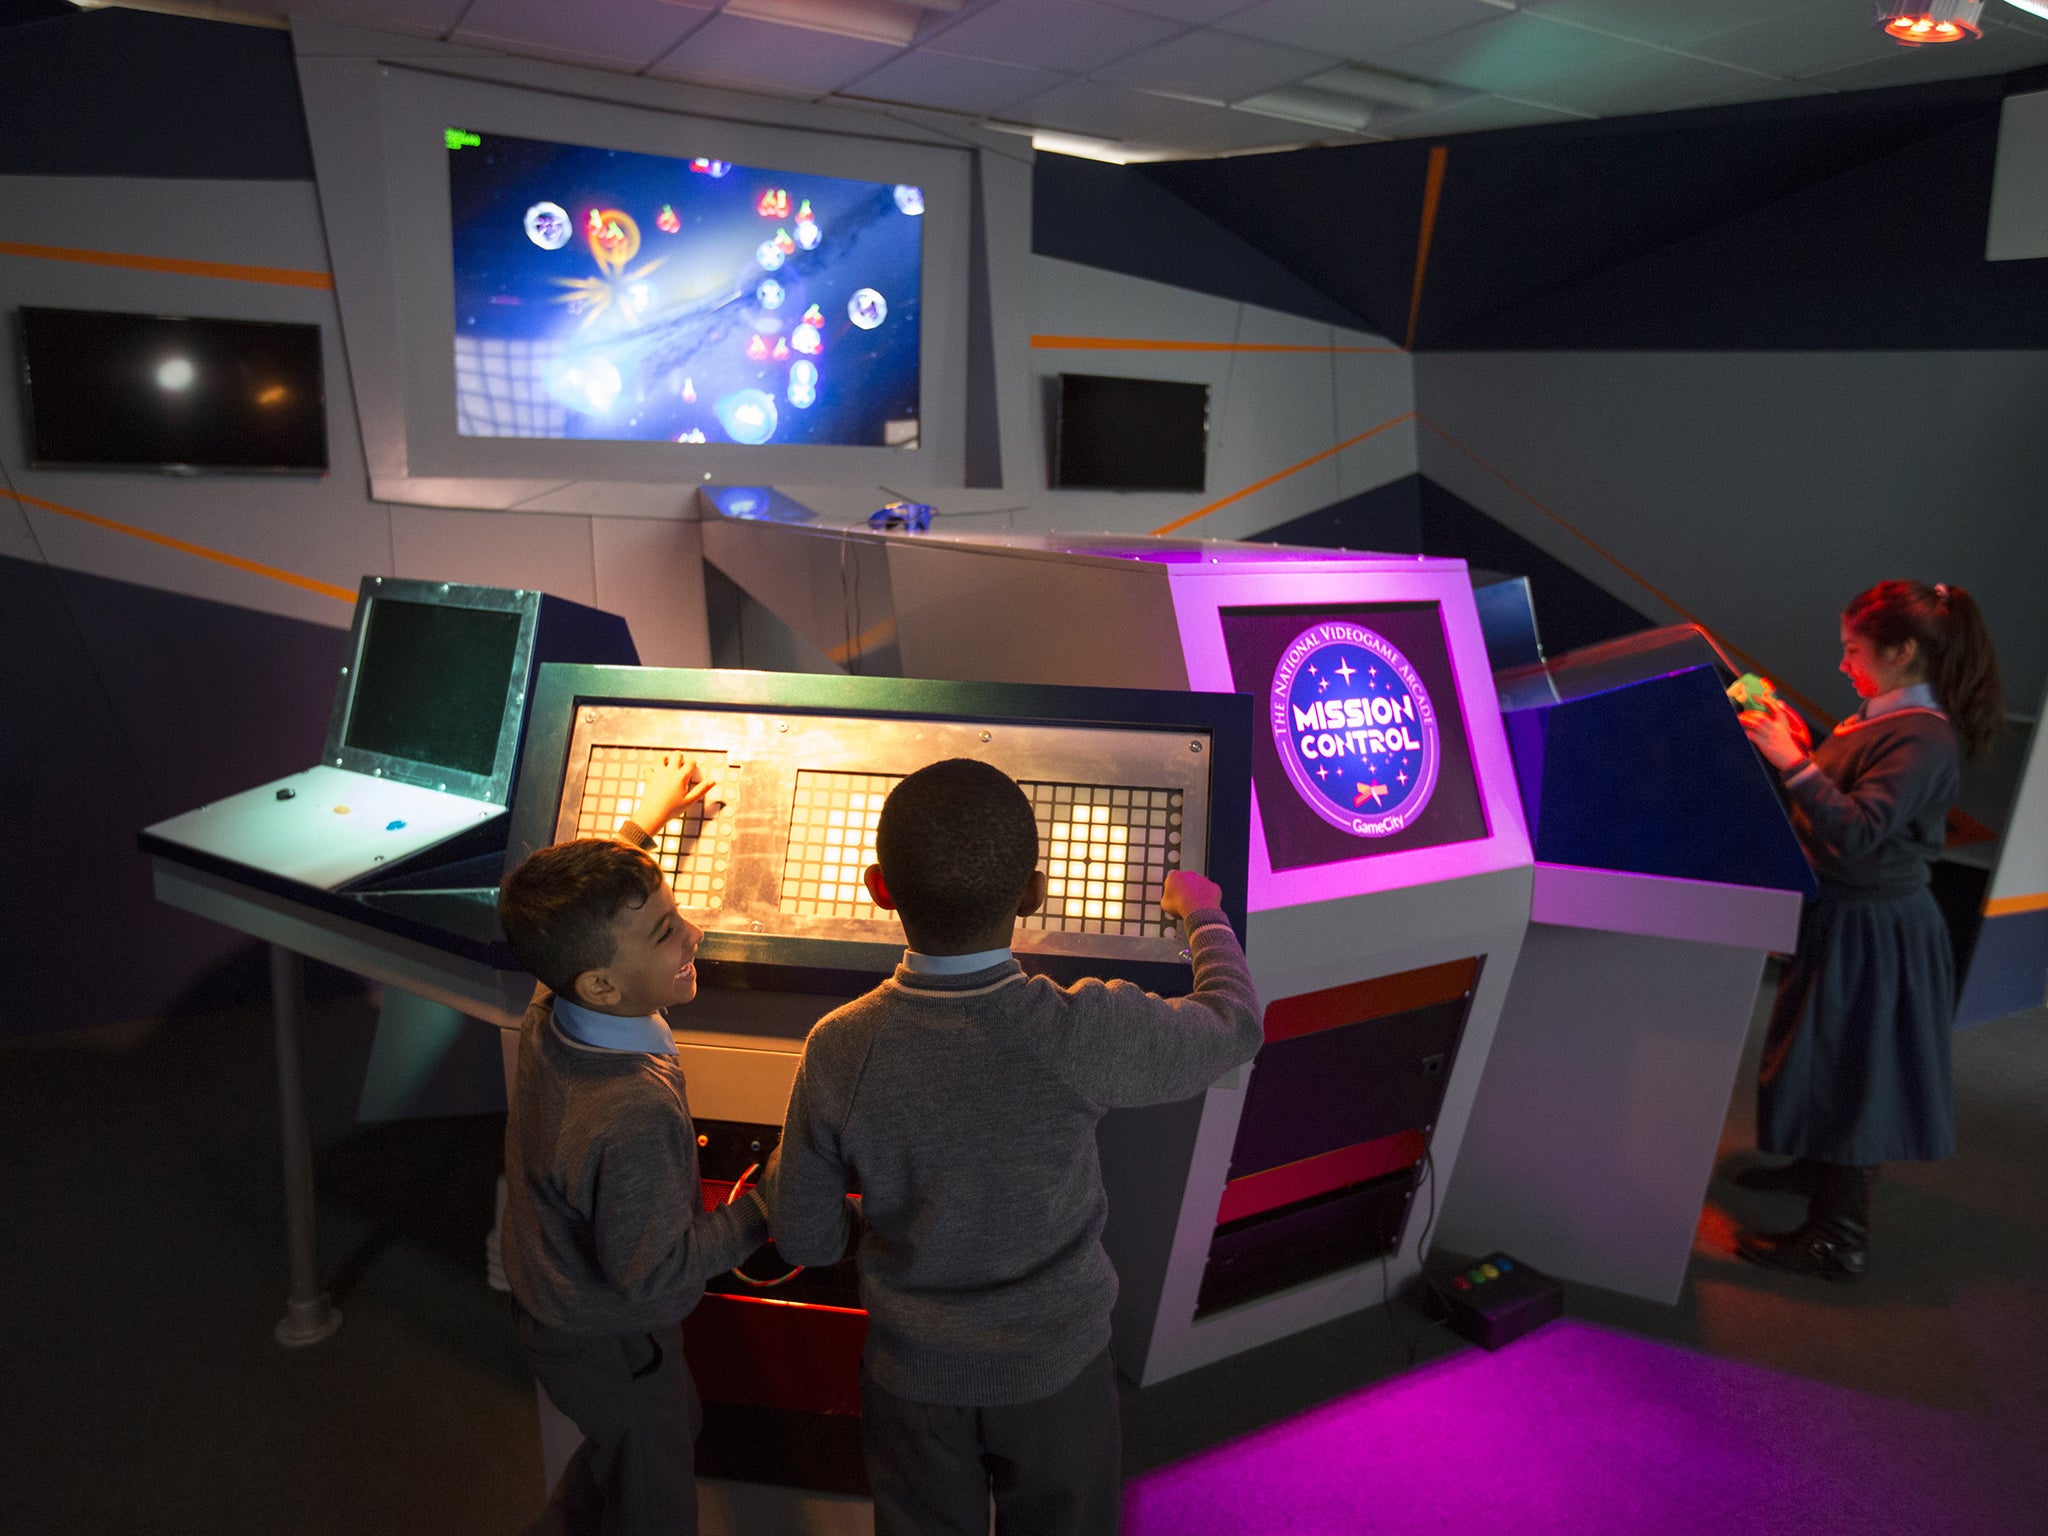 Children tackle Mission Control at the NVA